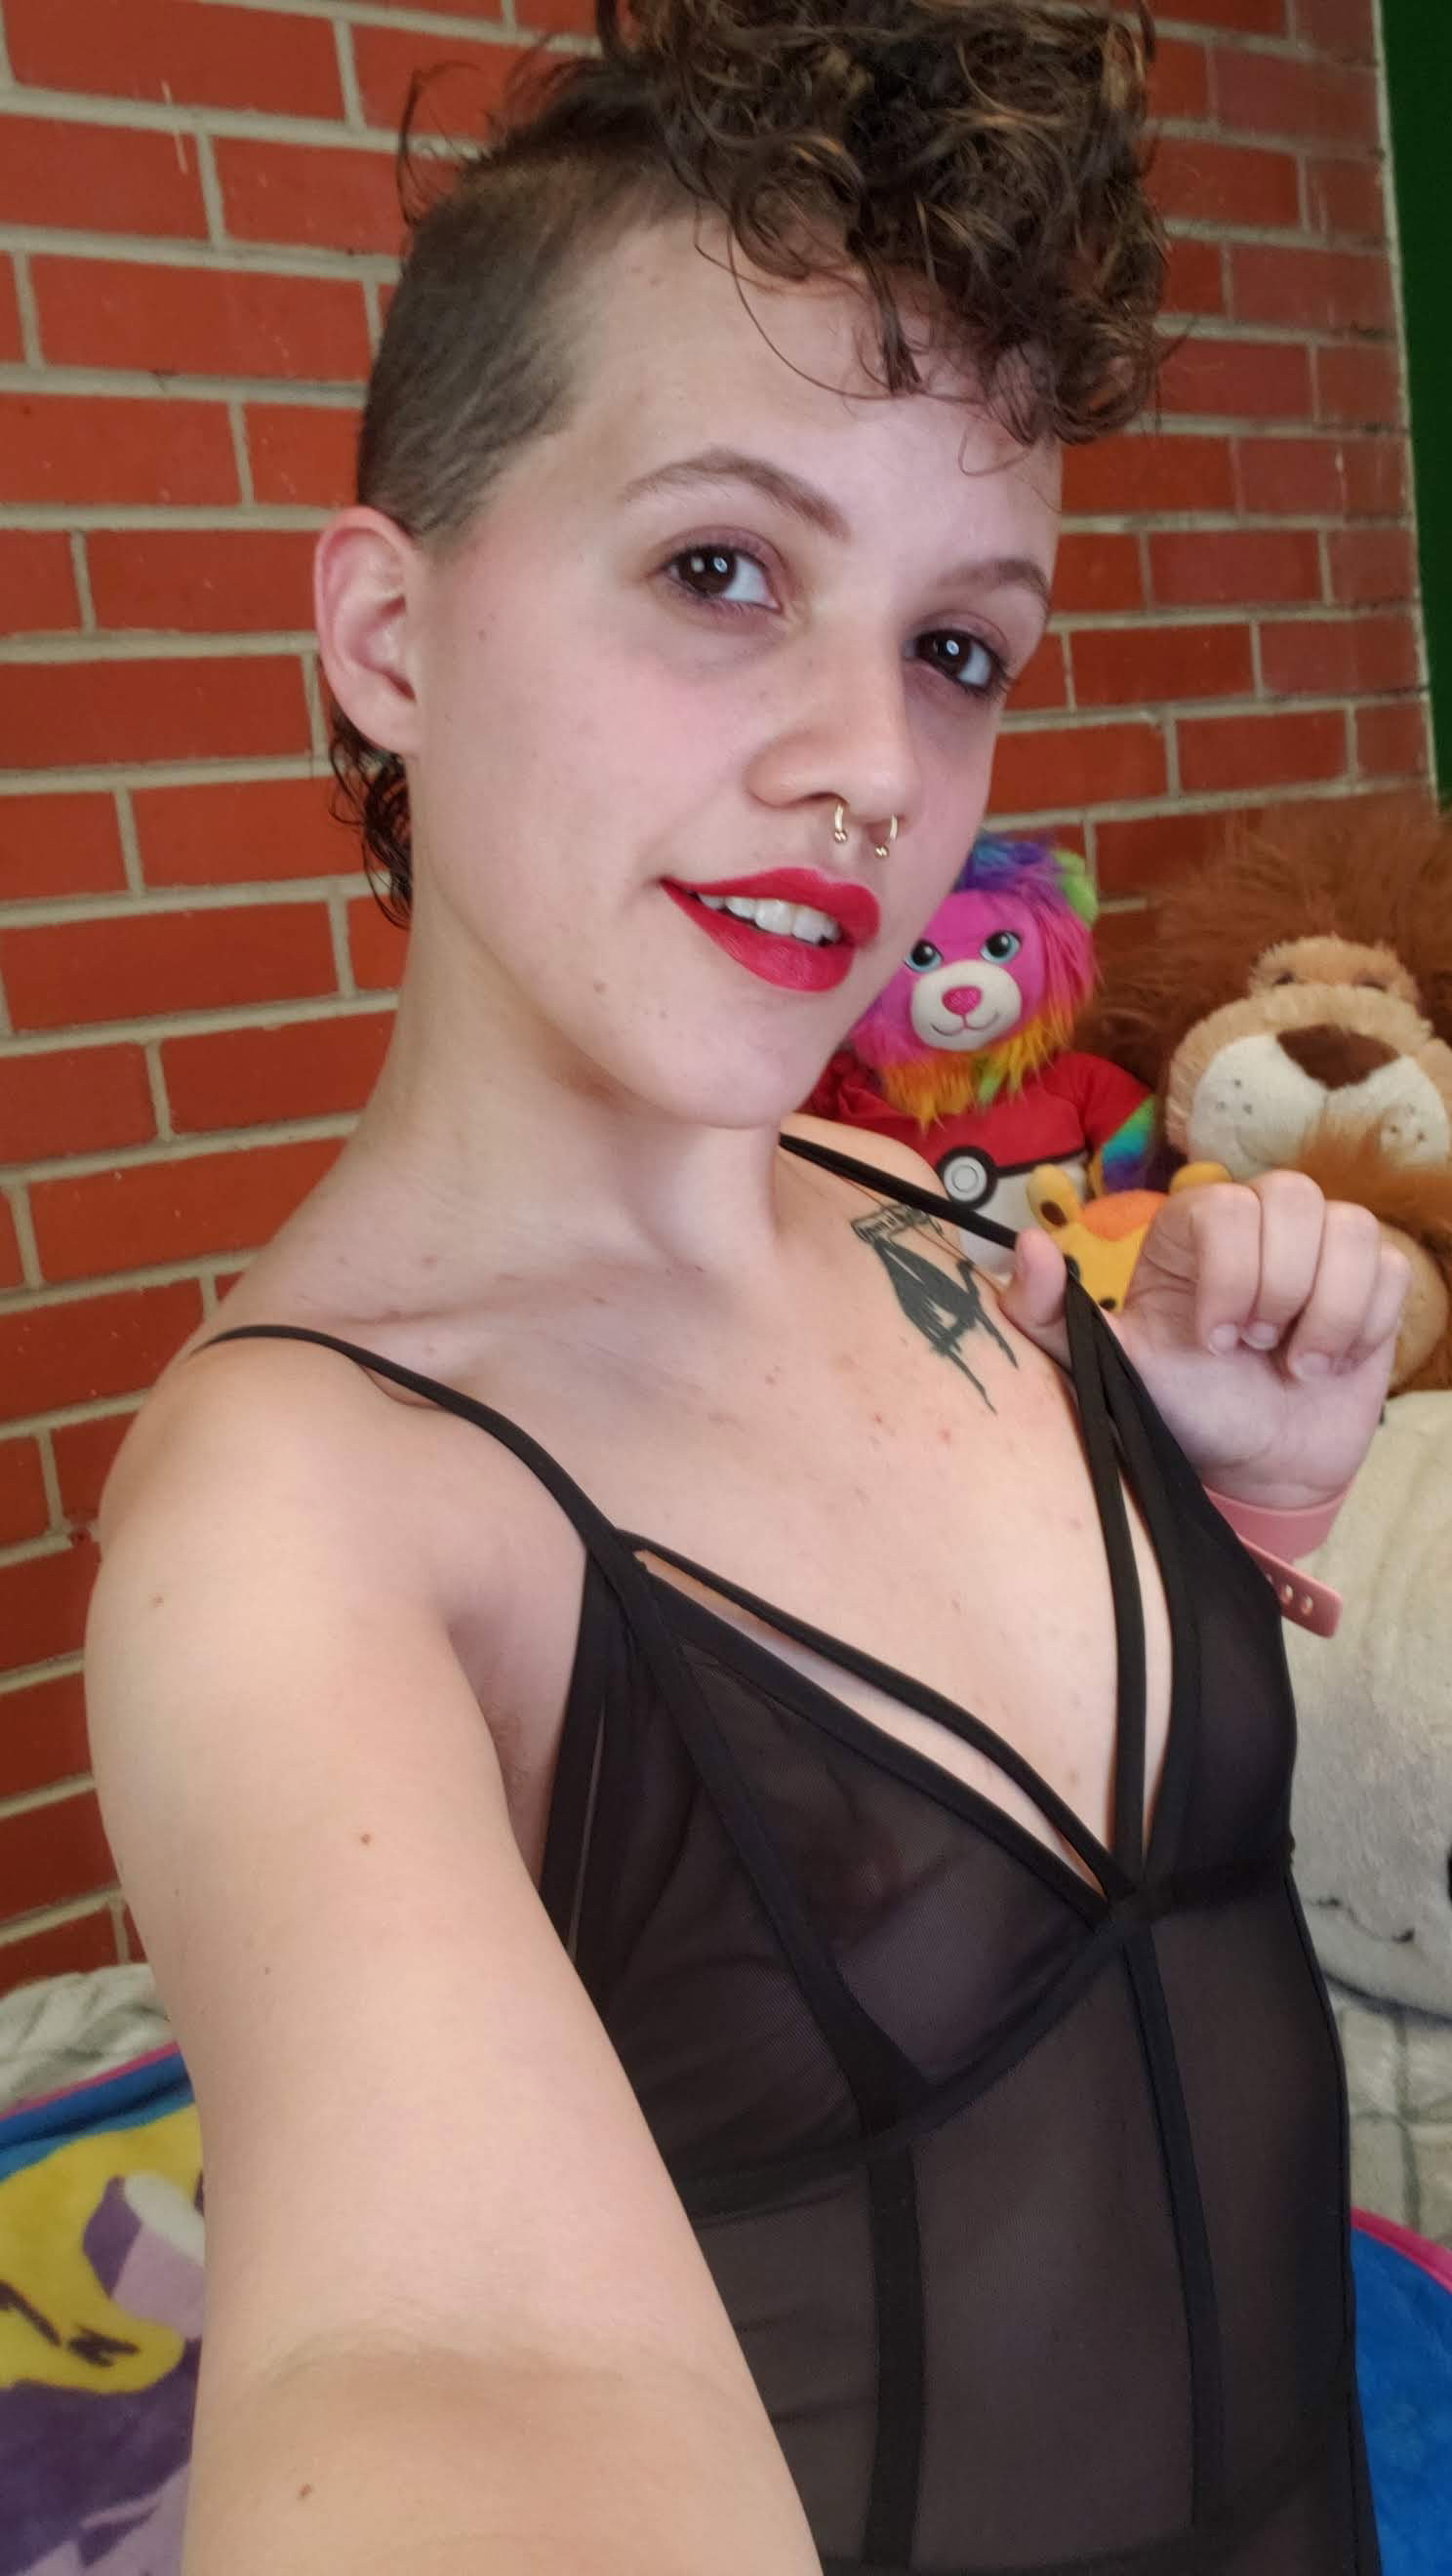 Photo by MxPraxisPhanes with the username @MxPraxisPhanes, who is a star user,  April 14, 2019 at 3:06 AM. The post is about the topic Amateurs and the text says 'I'm live now!

nood.tv'